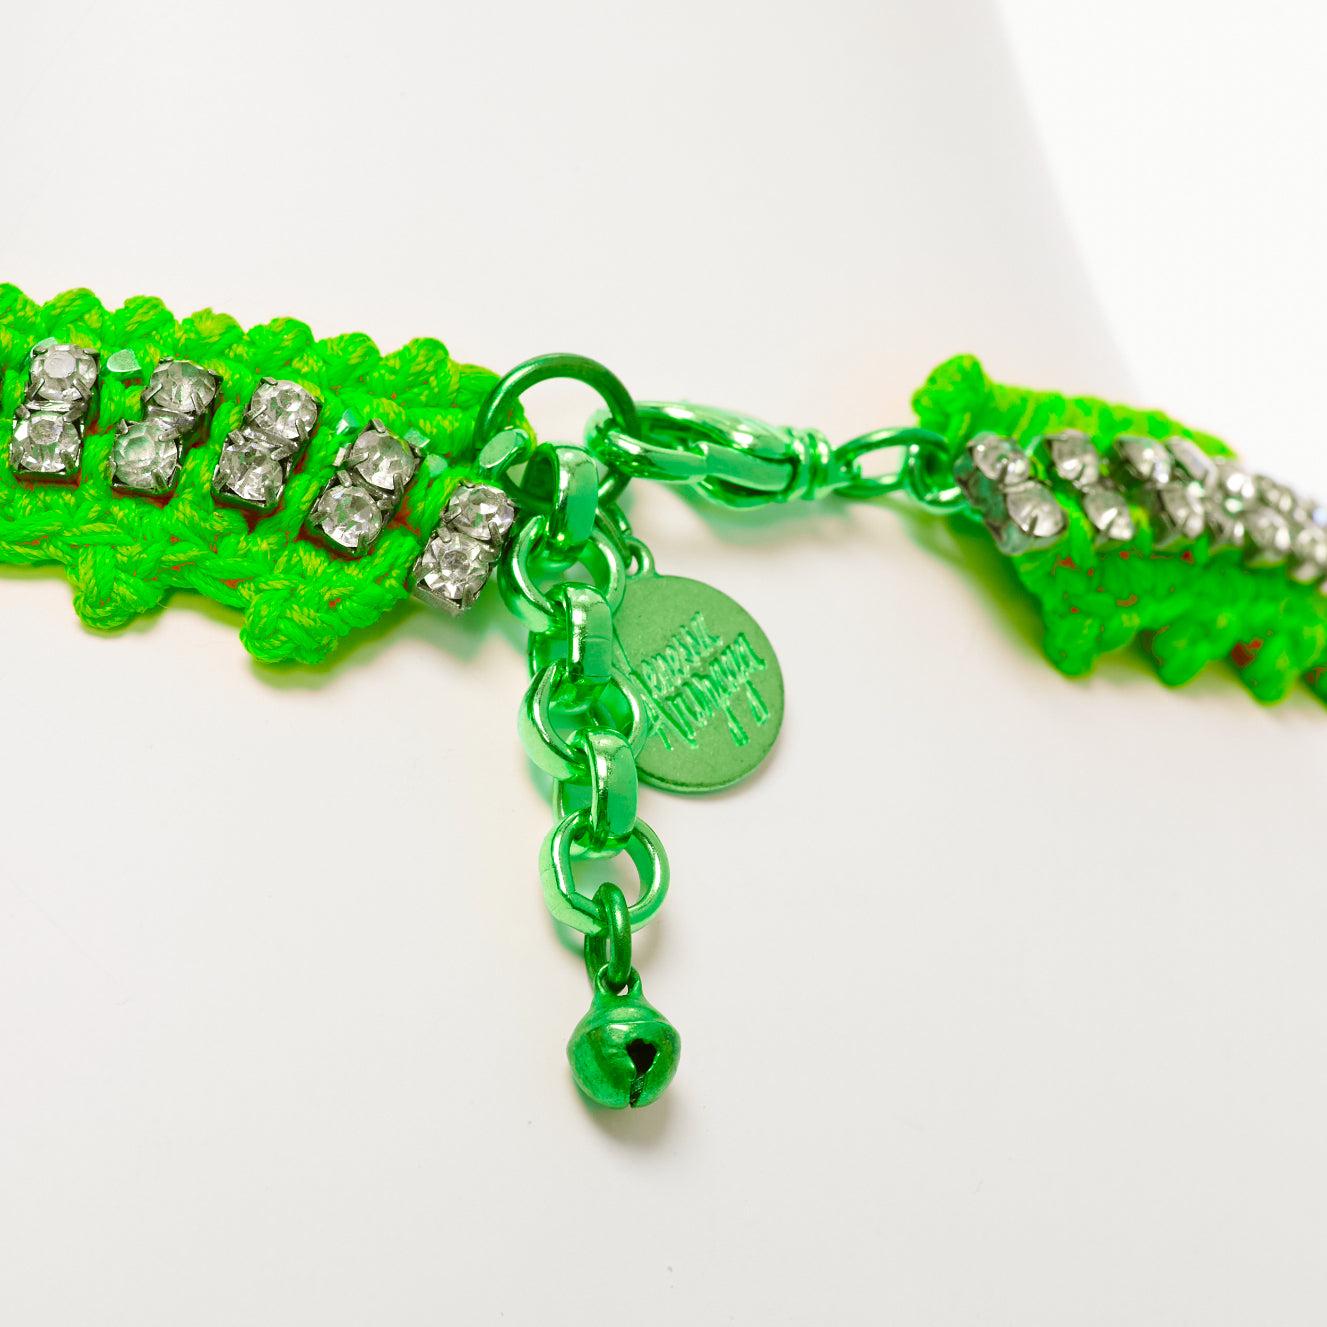 VANESSA ARIZAGA neon green rope clear crystal chandelier short necklace
Reference: AAWC/A01045
Brand: Vanessa Arizaga
Material: Metal, Fabric
Color: Neon Green, Clear
Pattern: Crystals
Closure: Lobster Clasp
Lining: Green Fabric
Extra Details: Logo